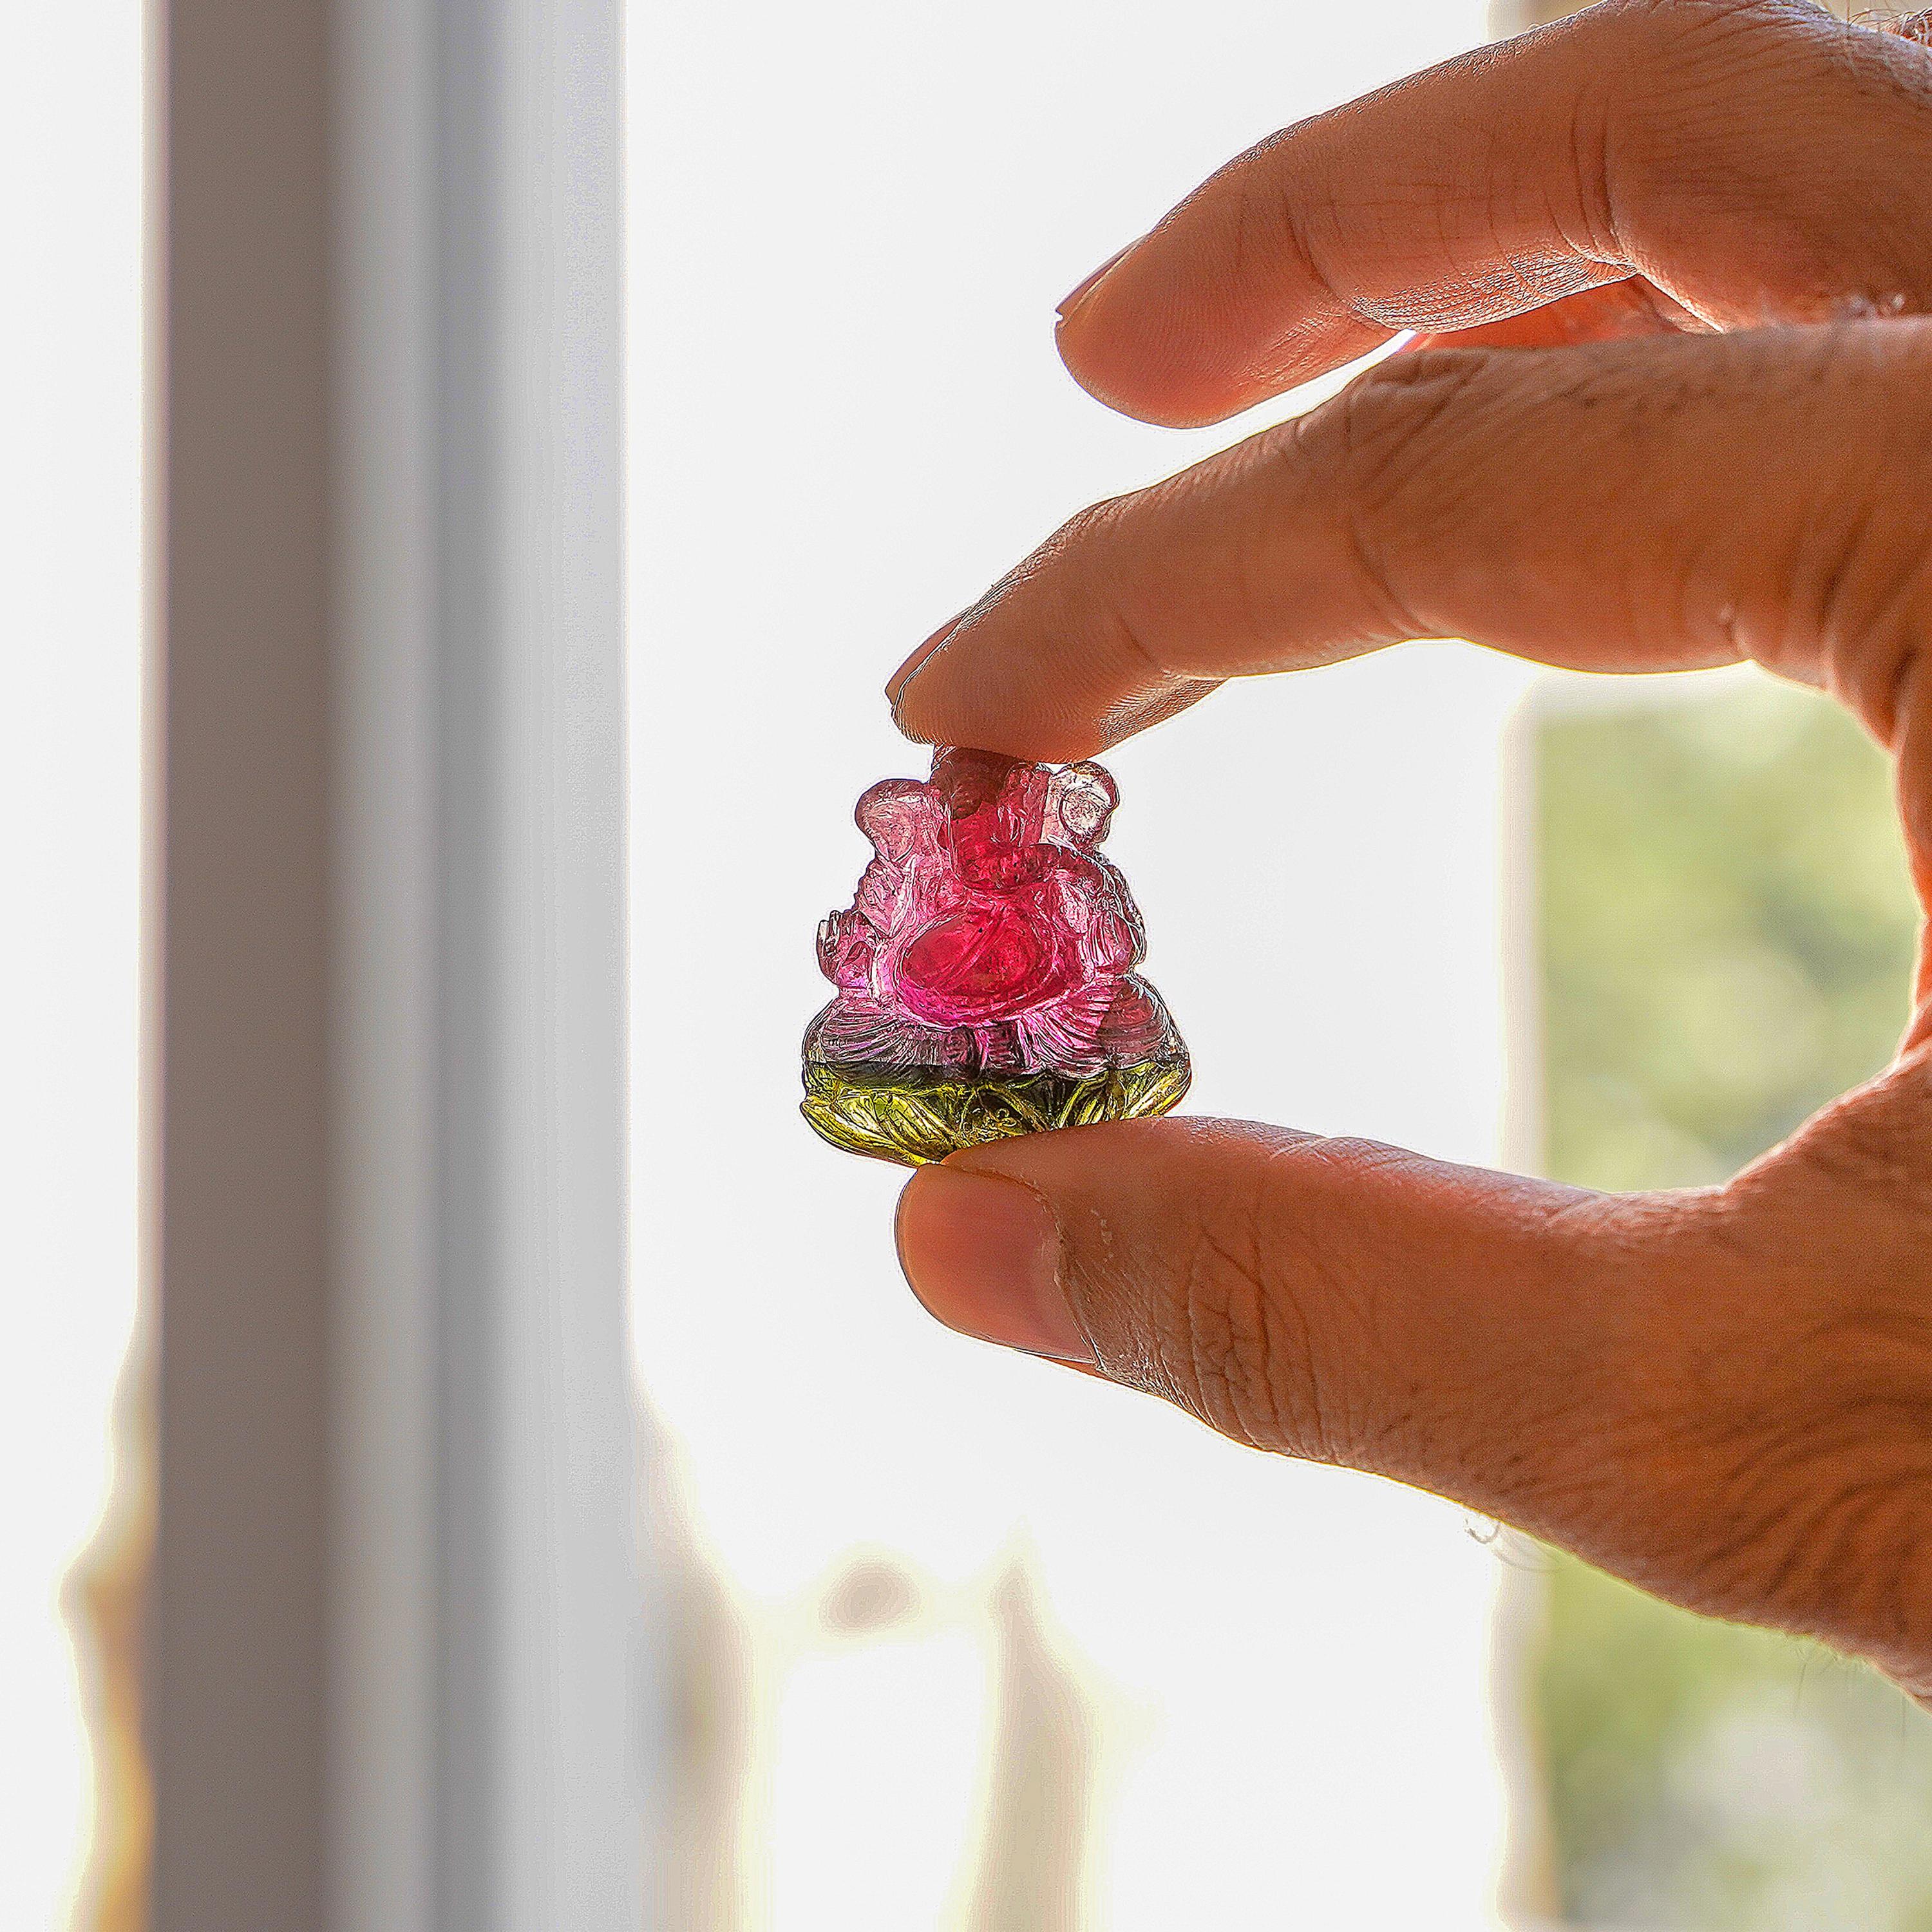 A one-of-a-kind hand-carved bi-color Watermelon Tourmaline Lord Ganesha gemstone pendant would be a truly remarkable and meaningful piece of jewelry. Watermelon Tourmaline, with its vibrant pink and green color combination, is a captivating gemstone